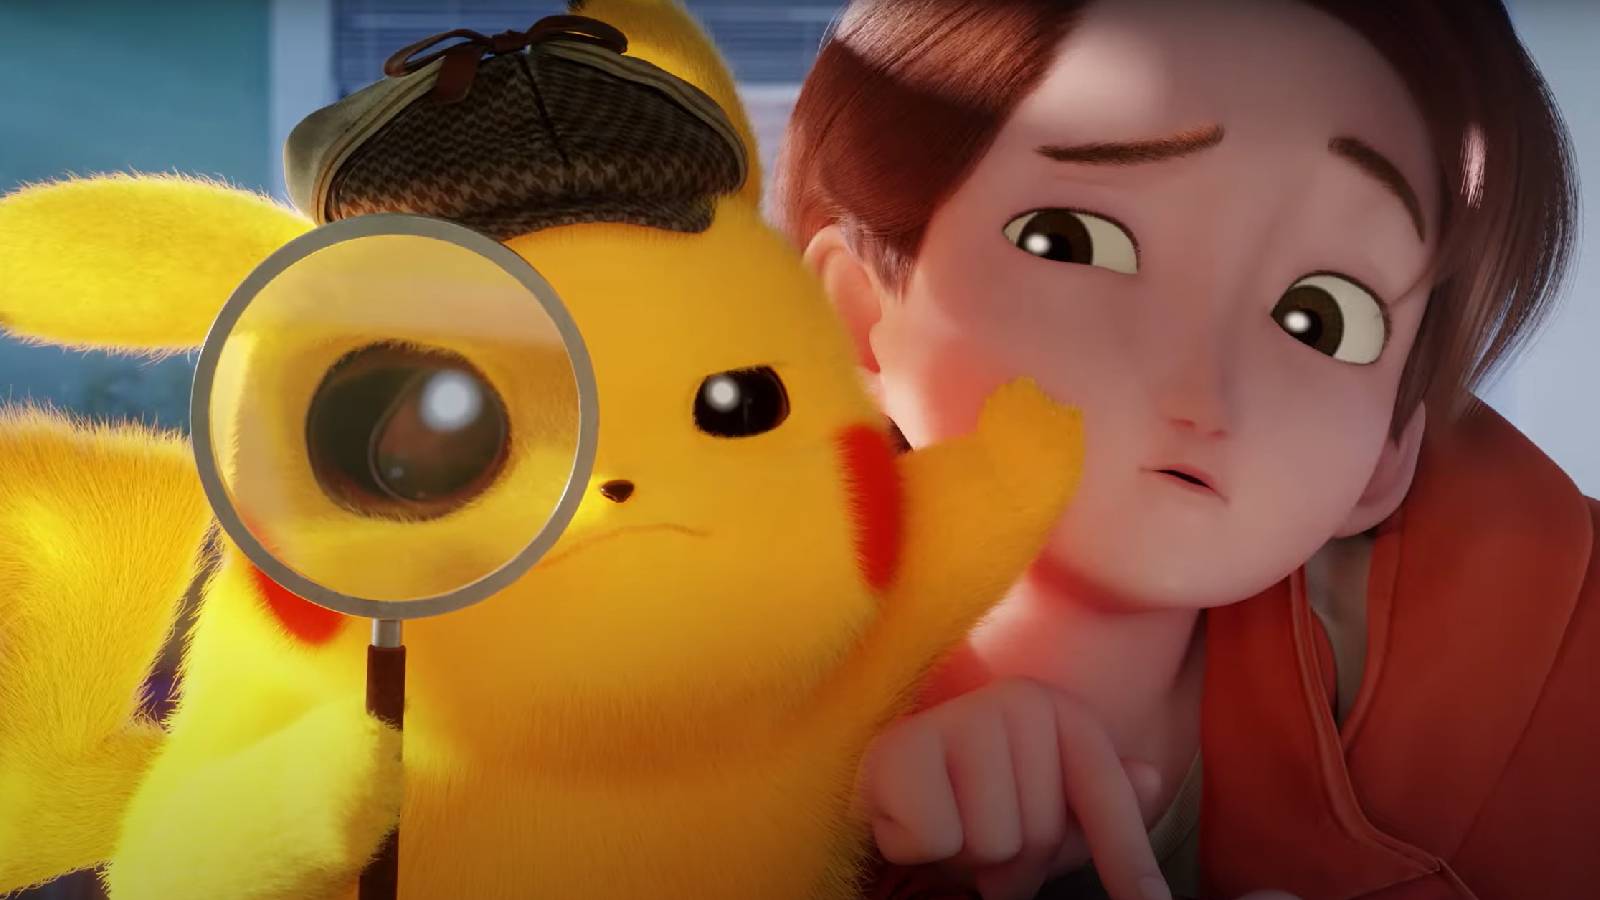 Detective Pikachu pushes Tim out of the way and lifts a magnifying glass to his eye